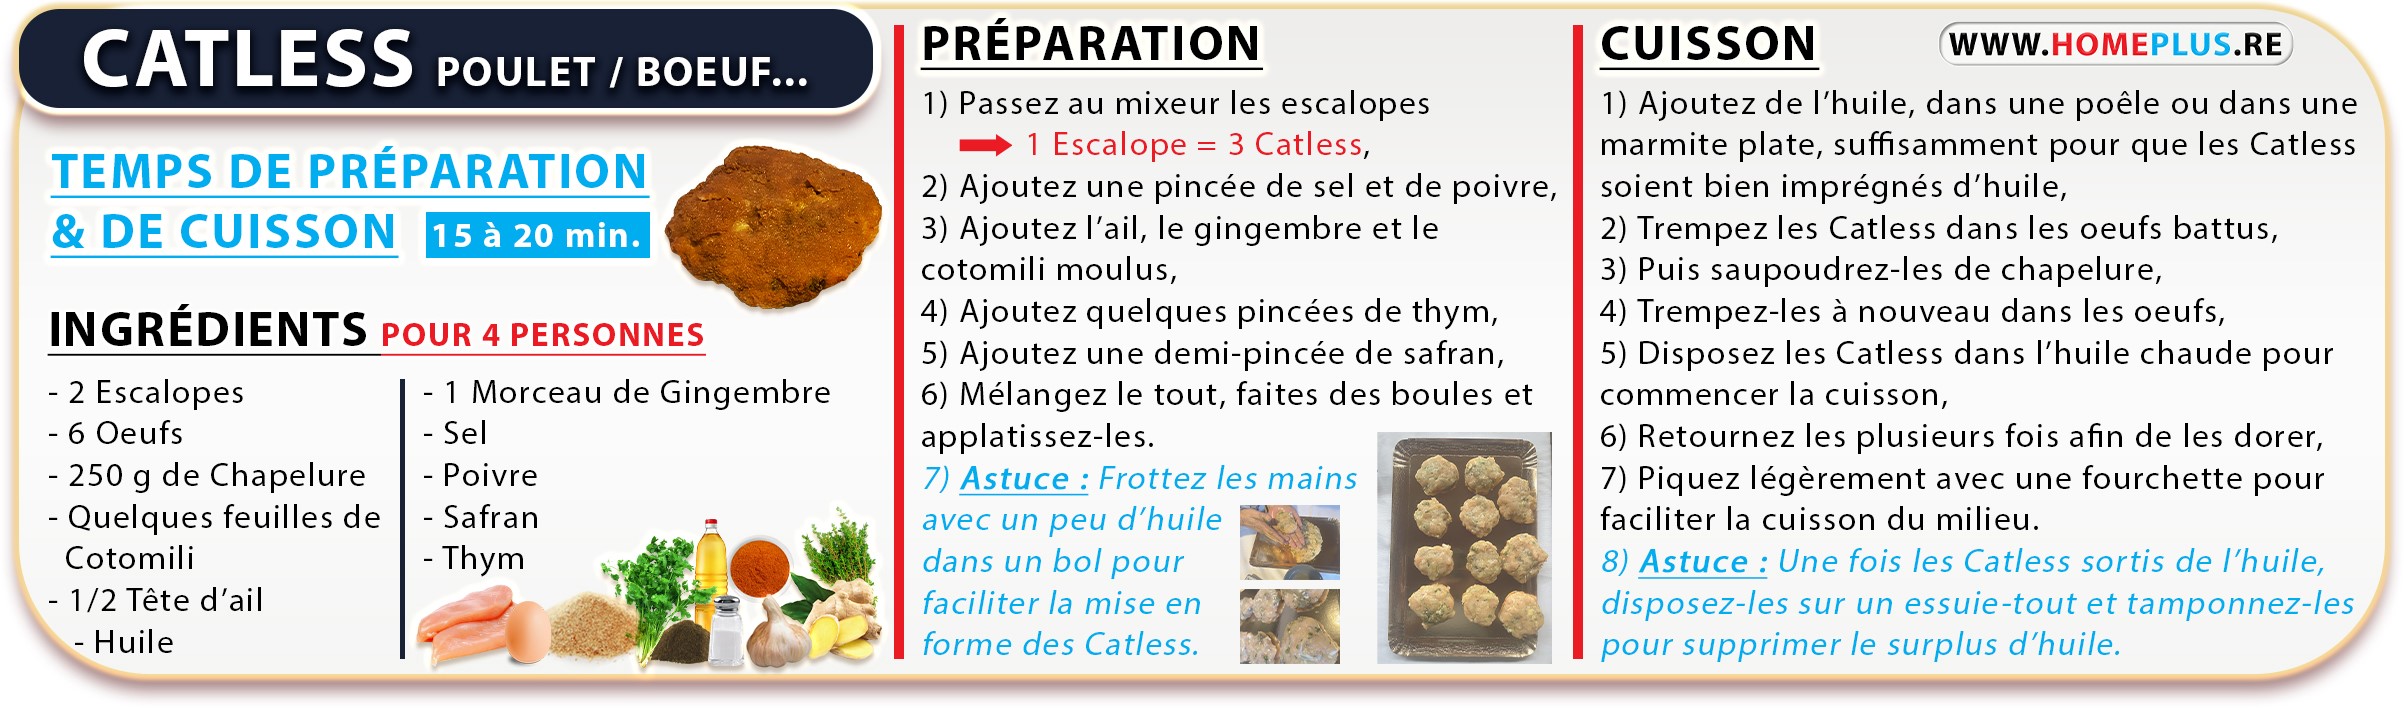 RECETTE - CATLESS